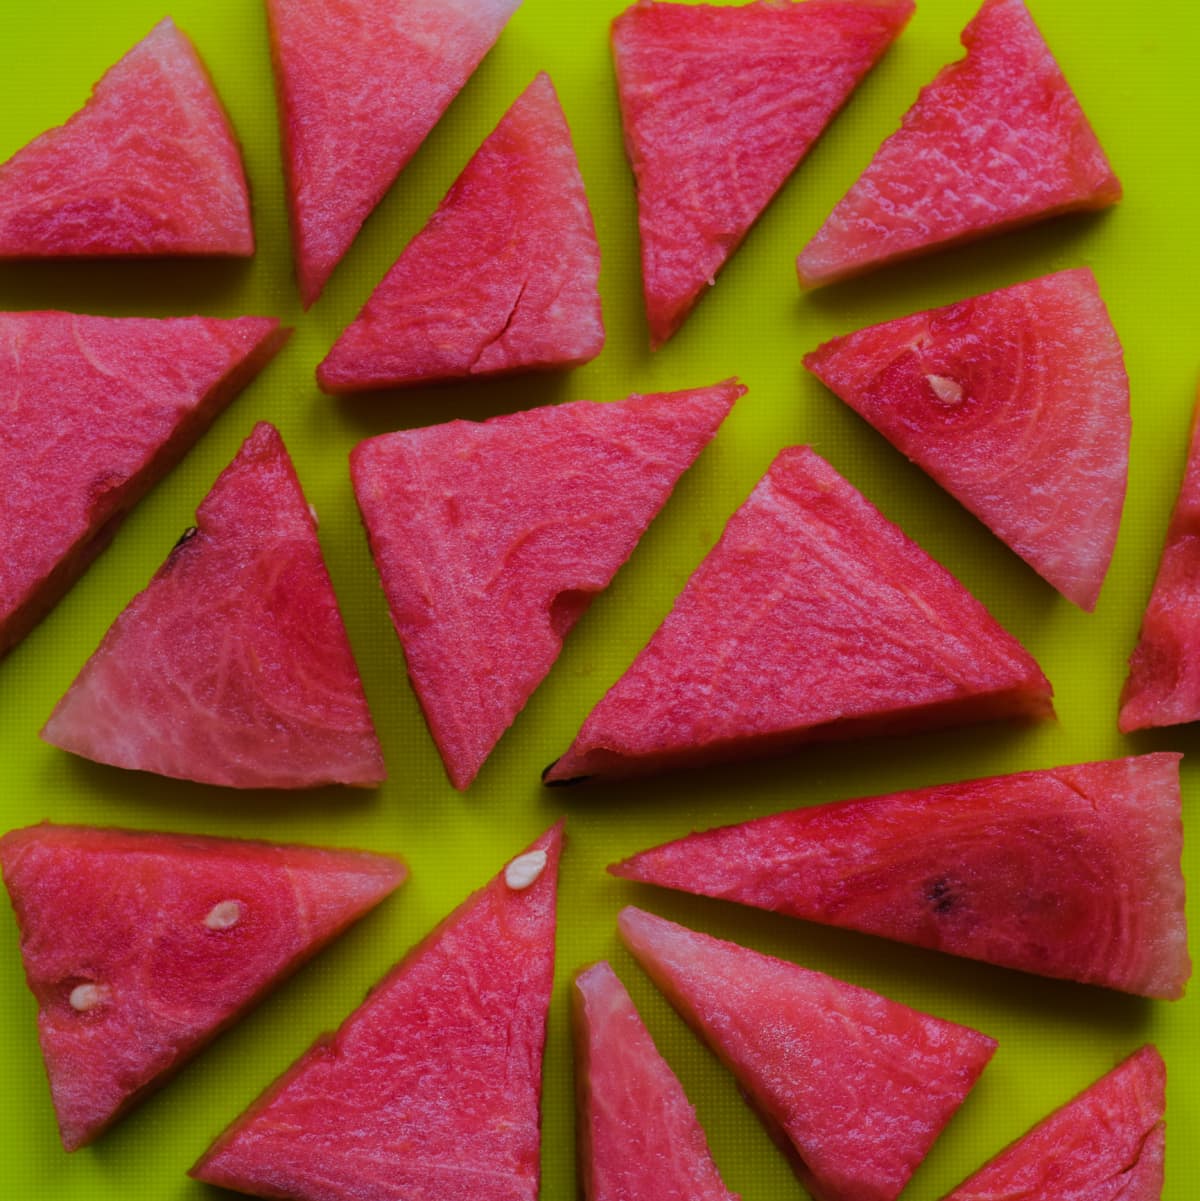 A square cropped image of variously shaped slices of fresh, vibrant watermelon